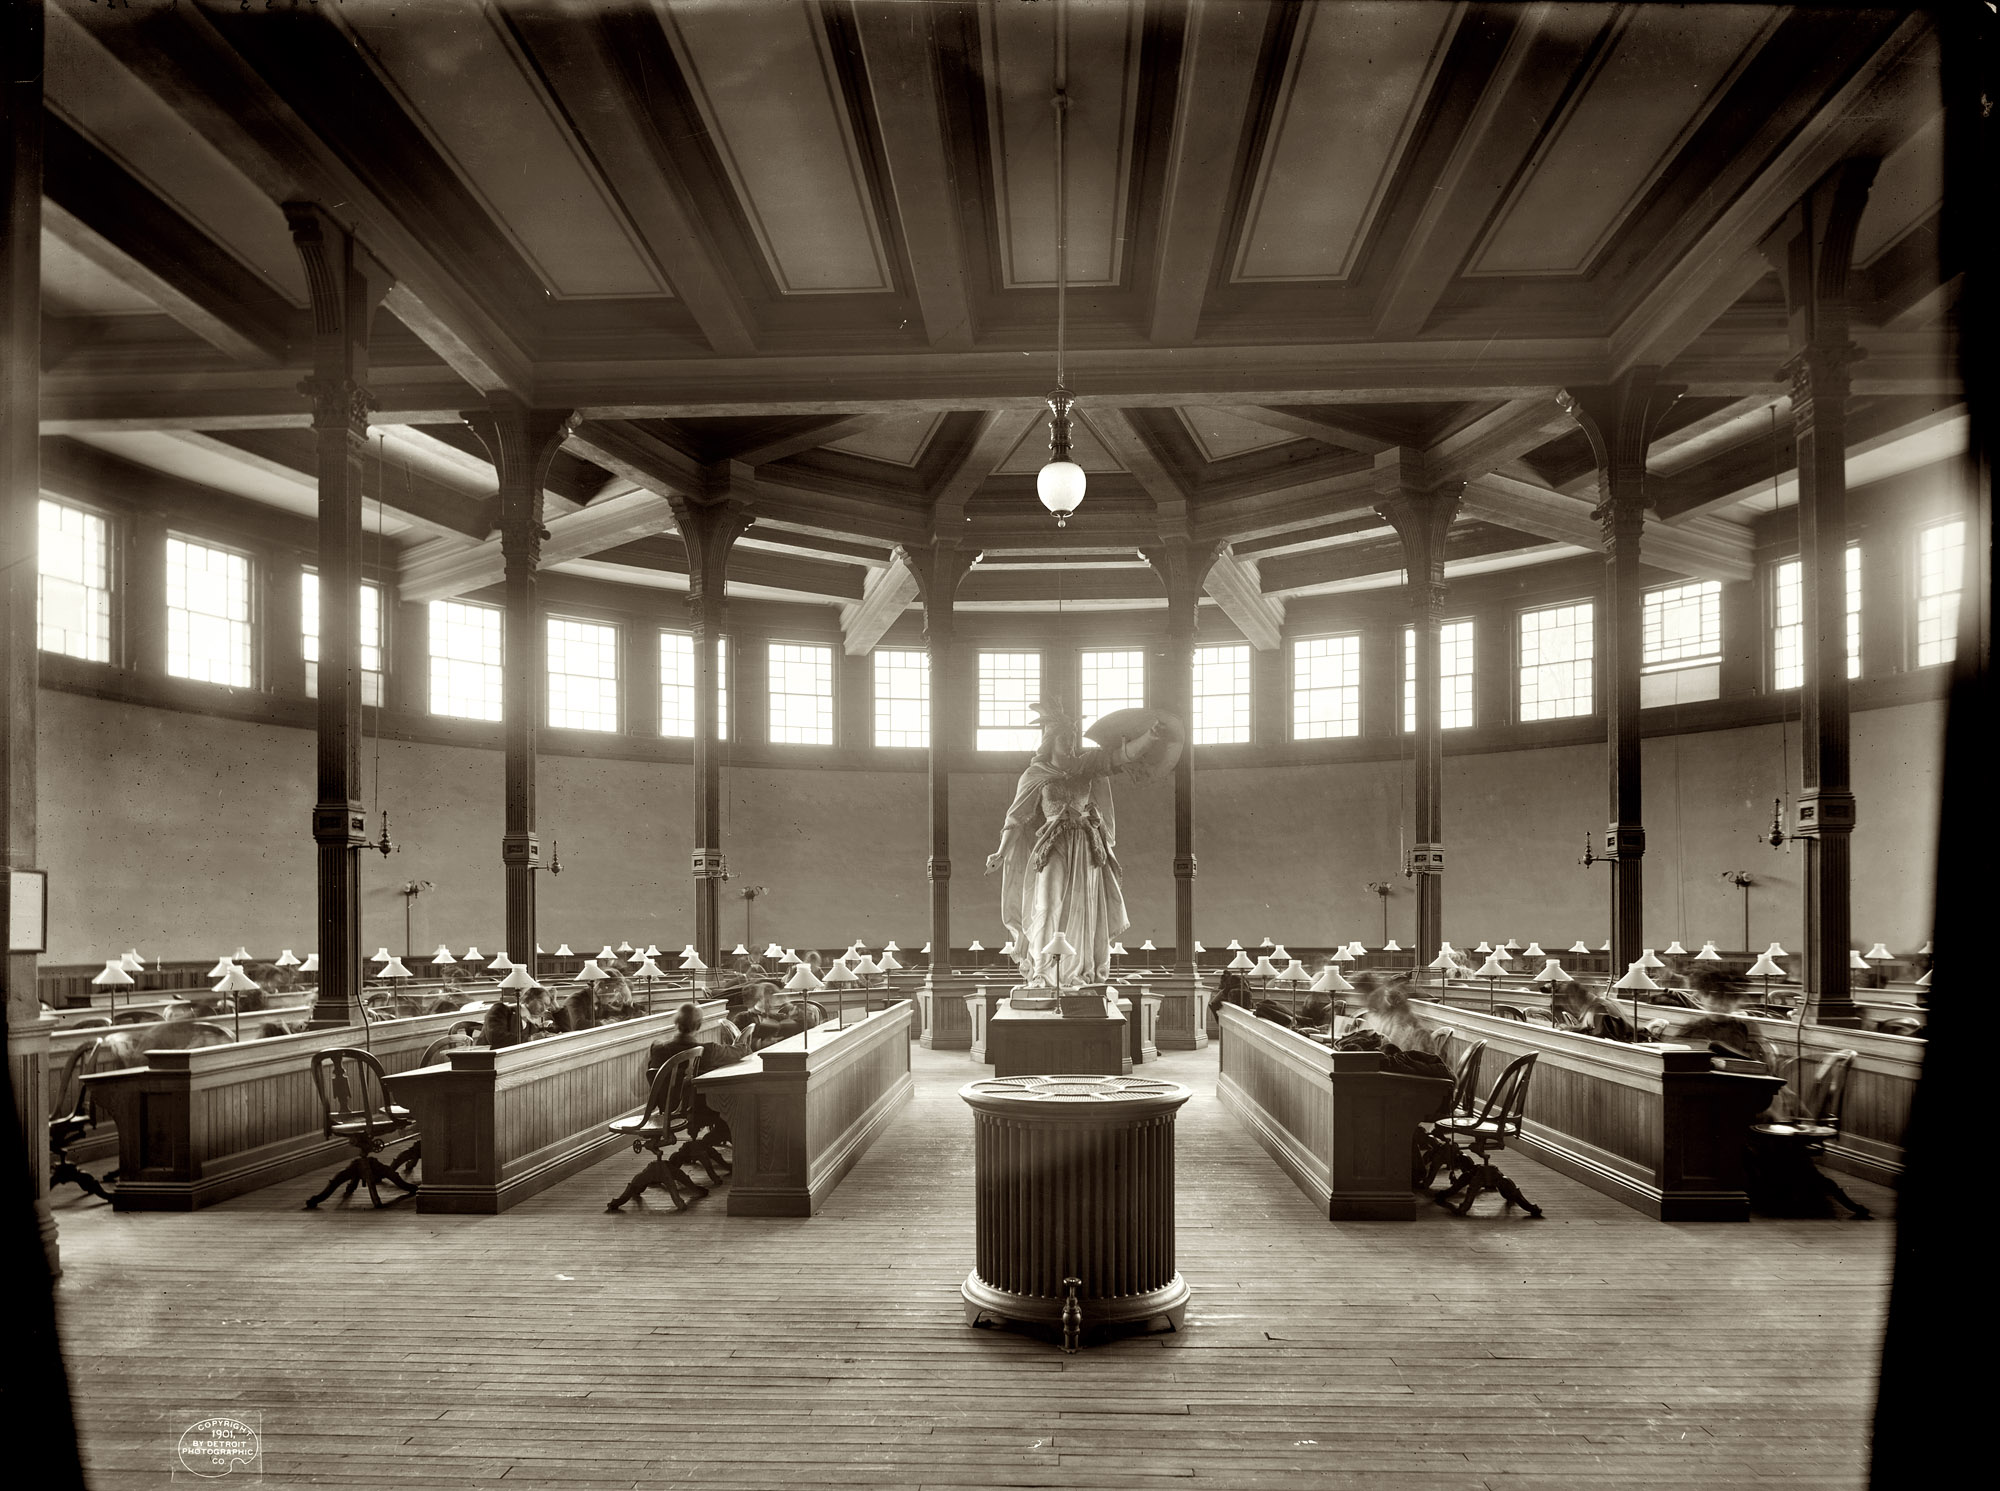 "University of Michigan library reading room, Ann Arbor, 1901." Detroit Publishing Company glass negative, Library of Congress. View full size.